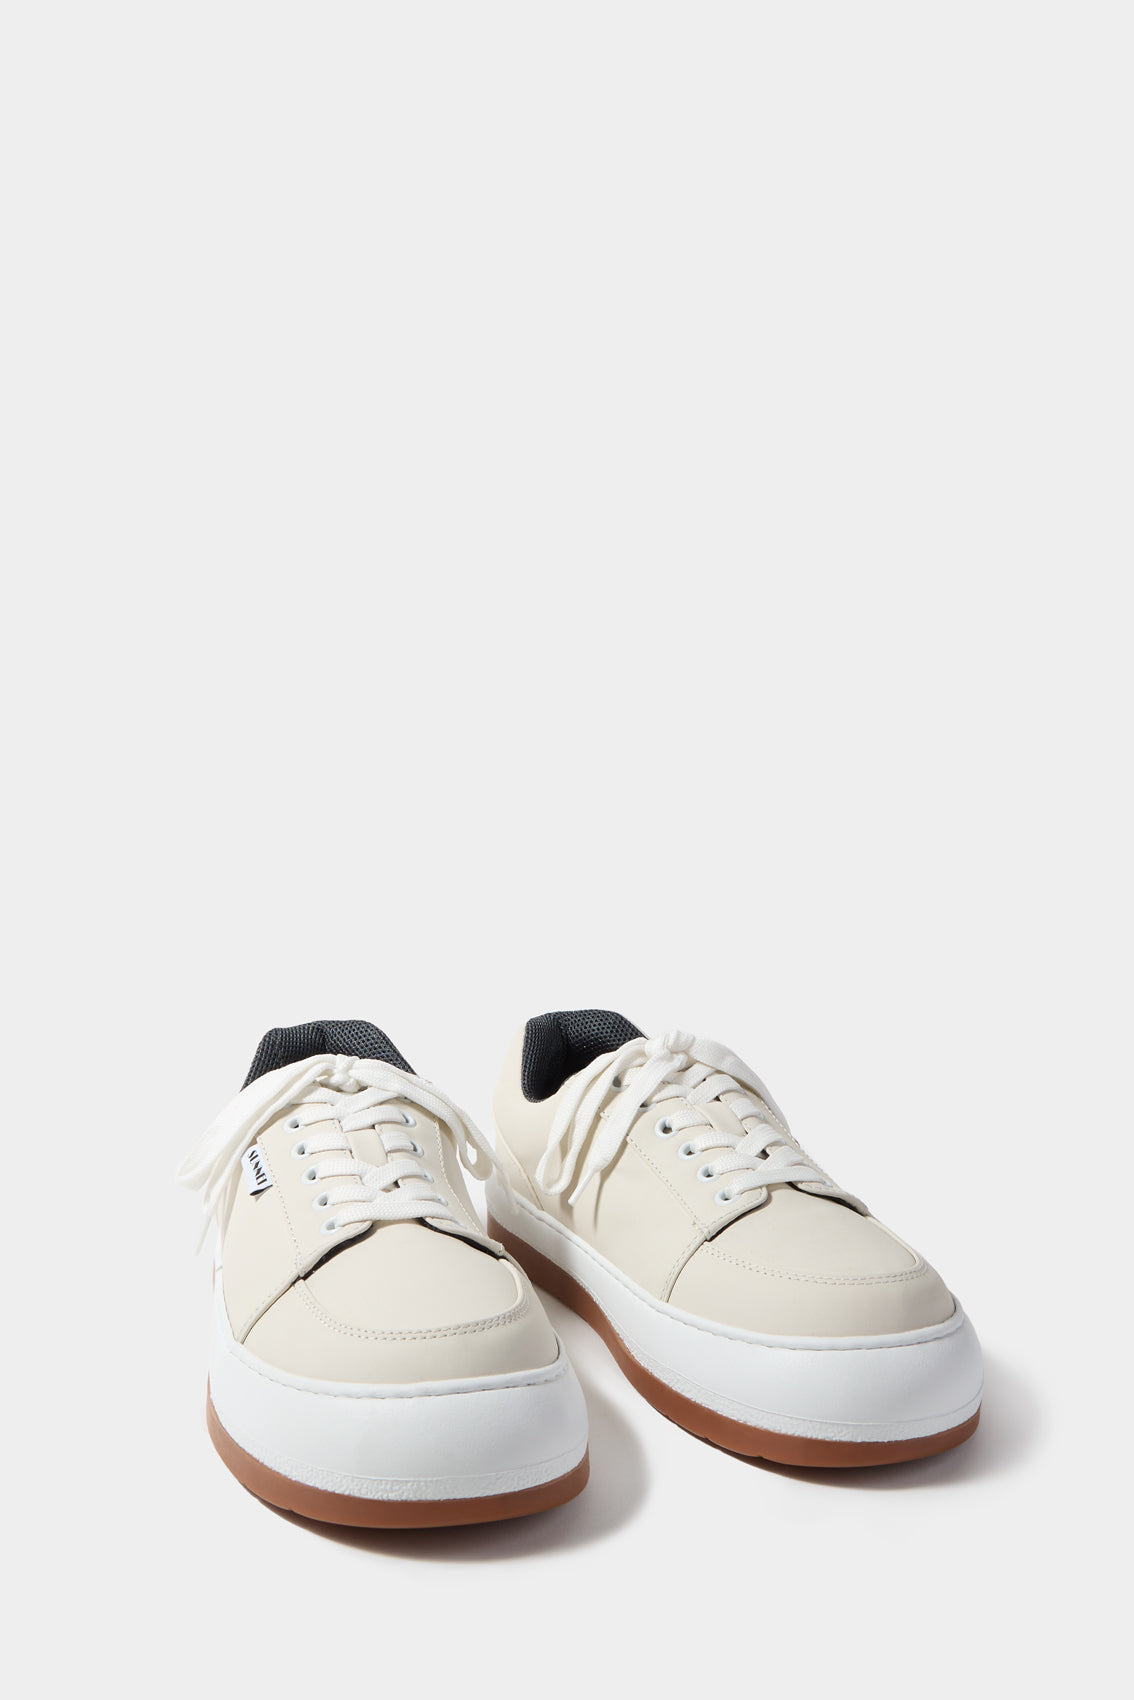 DREAMY SHOES / leather / white